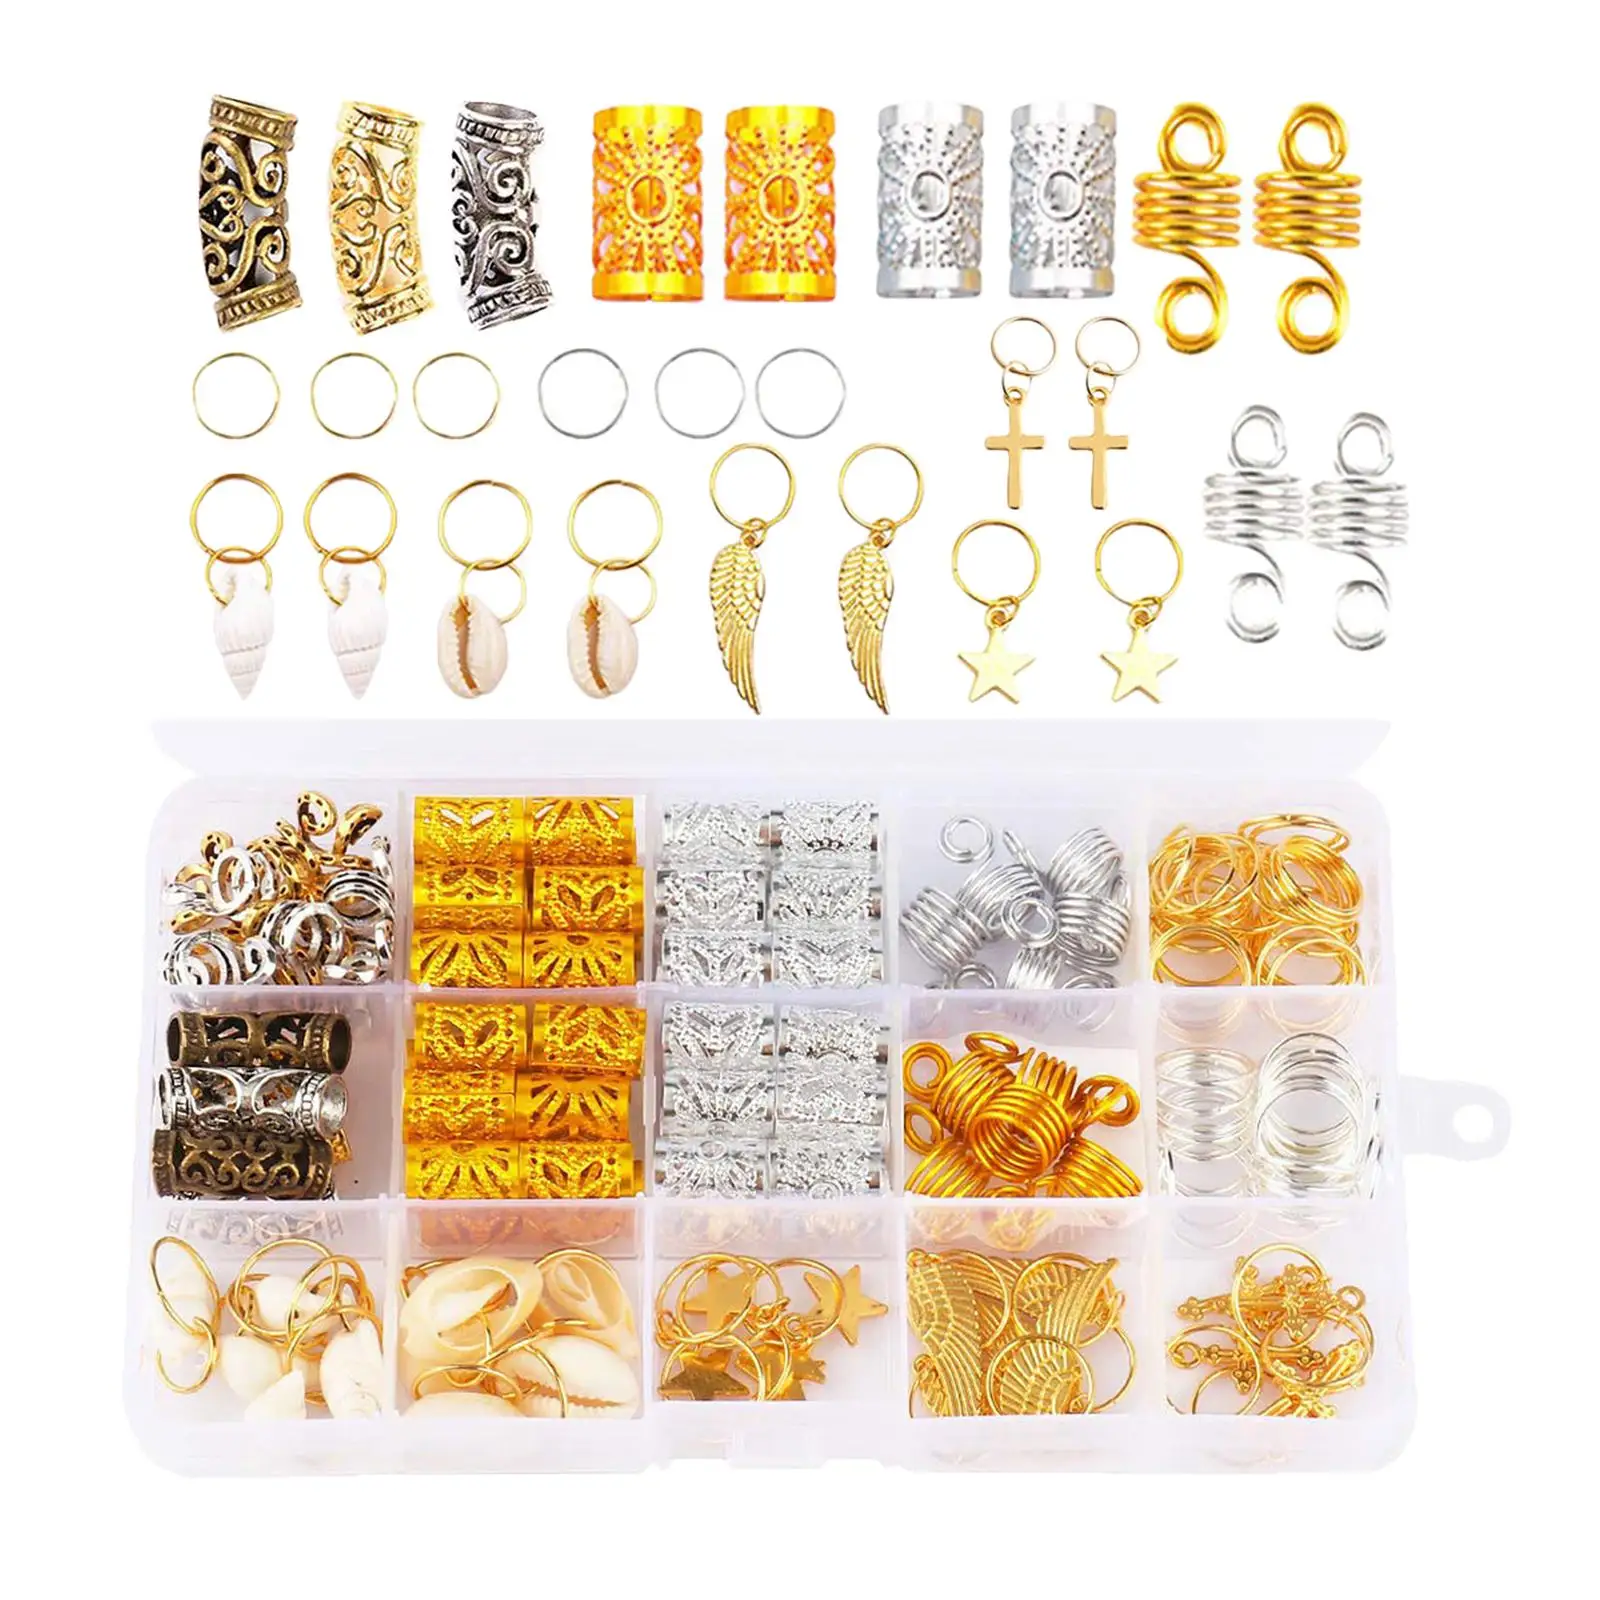 Alloy Hair Extension Clips Kit Shell Cylinder Decoration Crafts Kit Hair Tie Clips for Dreadlock Make up Salon Women Kids Adult